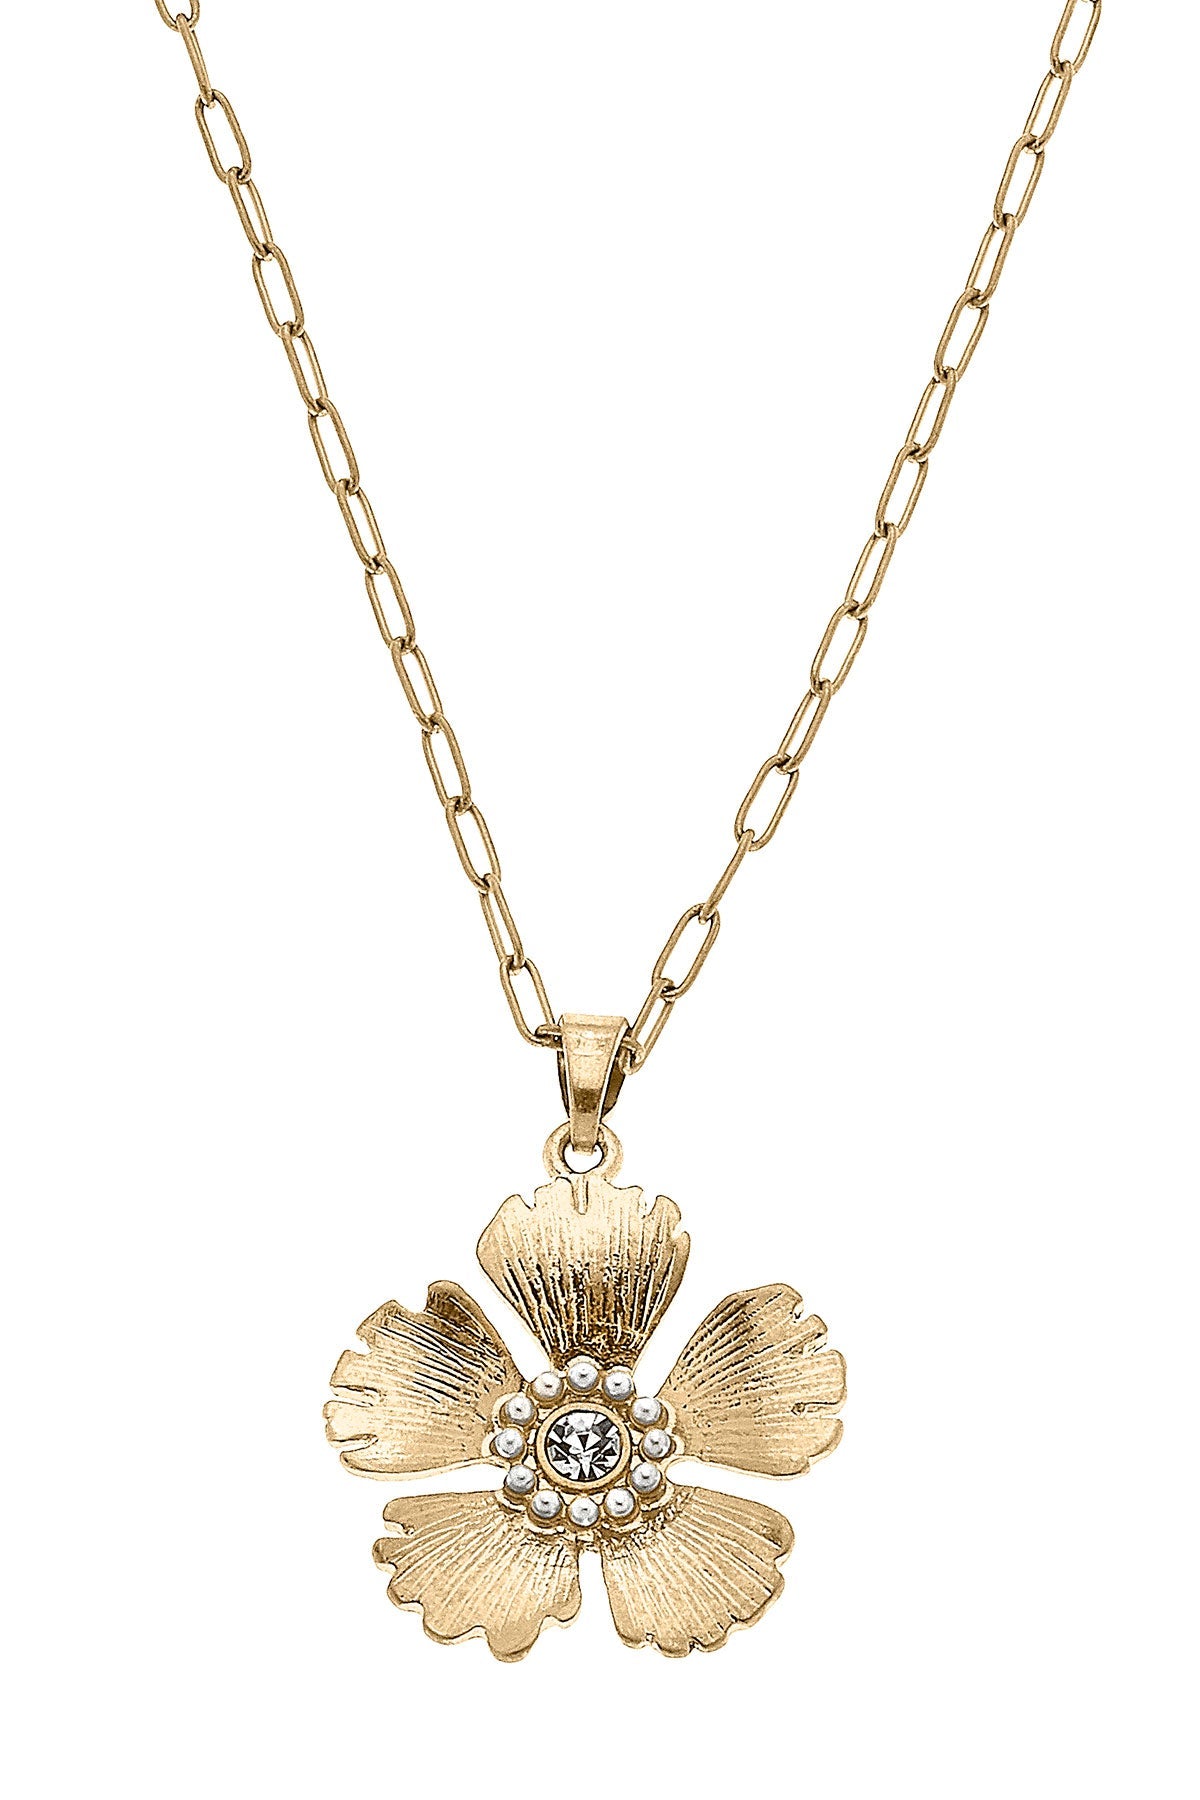 Tiana Flower Pendant Necklace in Worn Gold by CANVAS